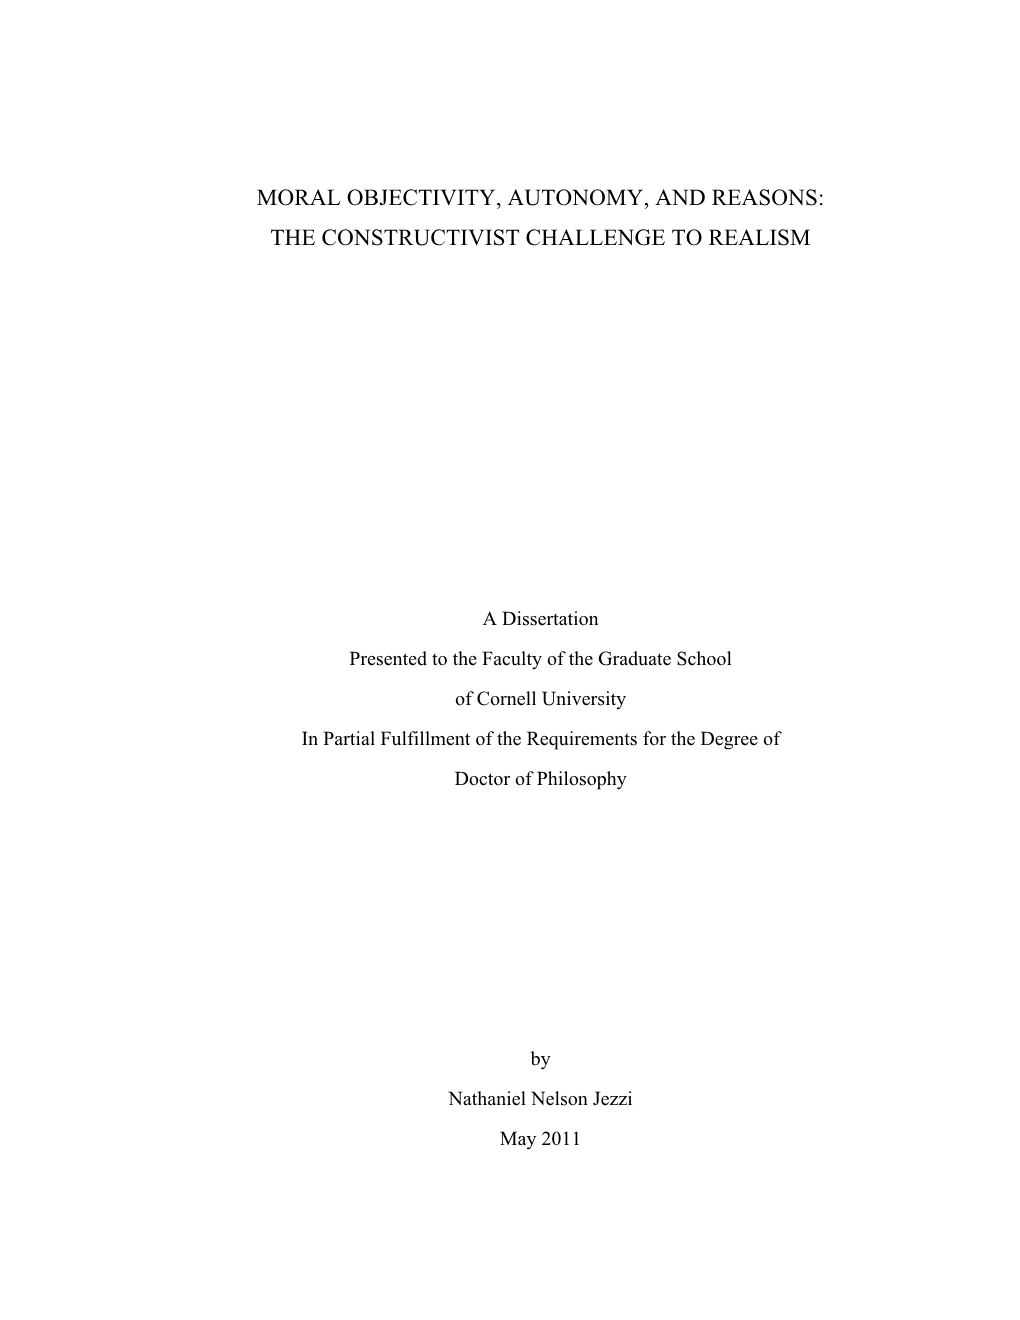 Moral Objectivity, Autonomy, and Reasons: the Constructivist Challenge to Realism